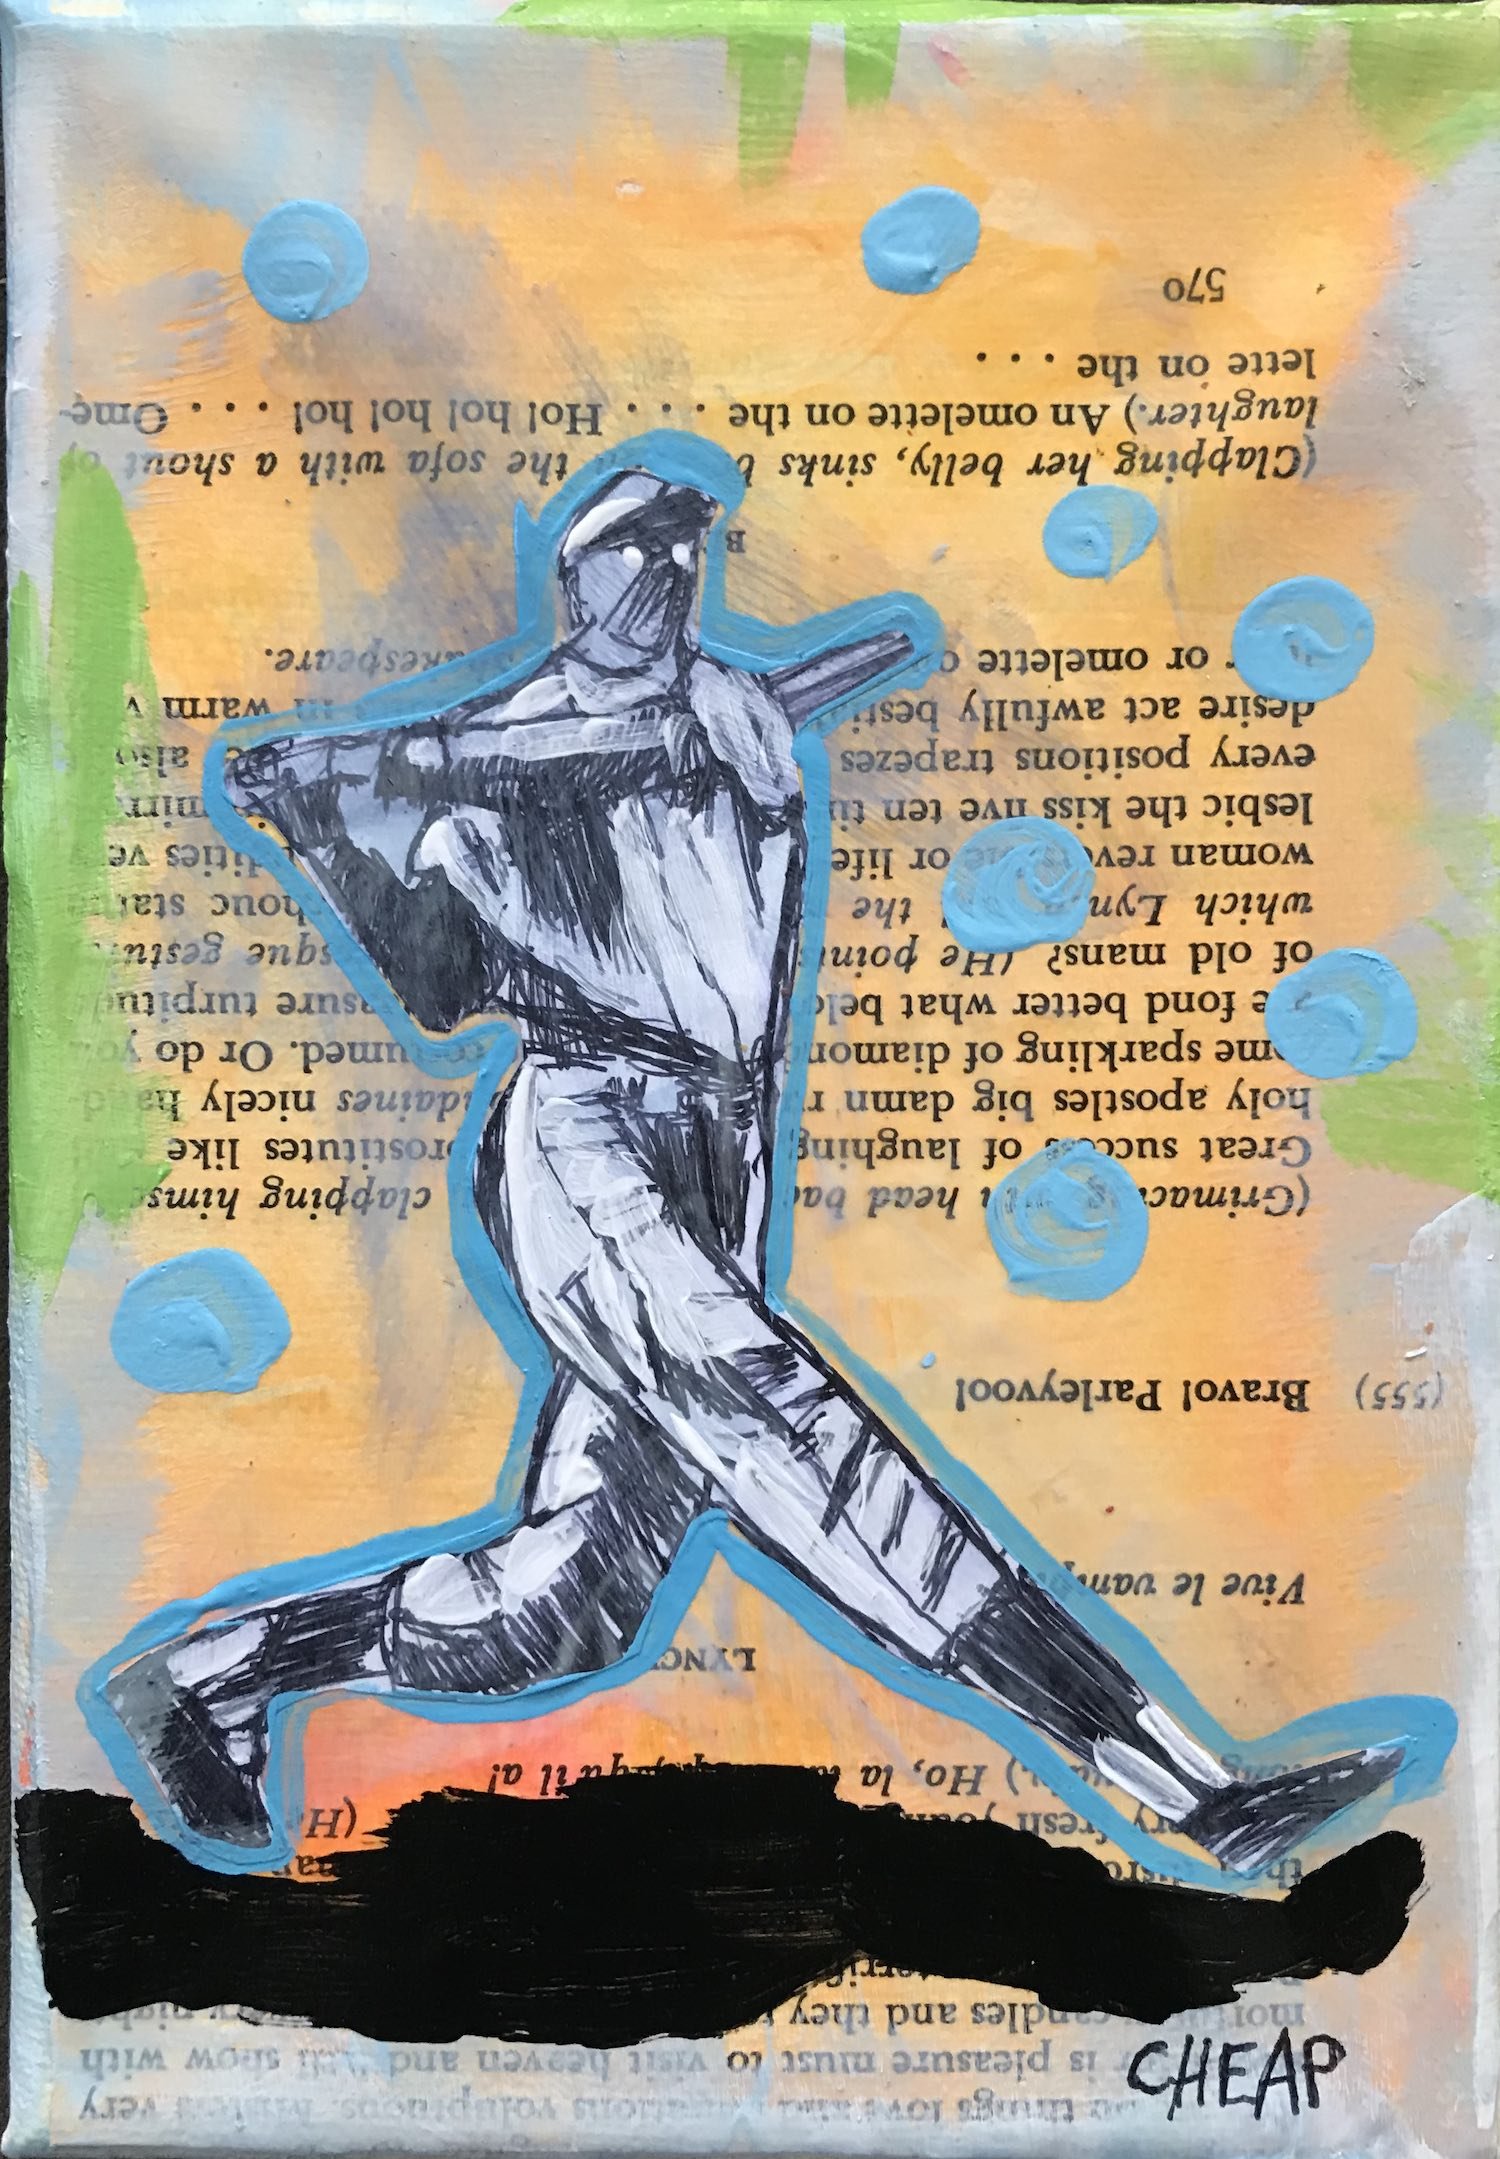 Swinging batter baseball painting by Vincent Cheap.